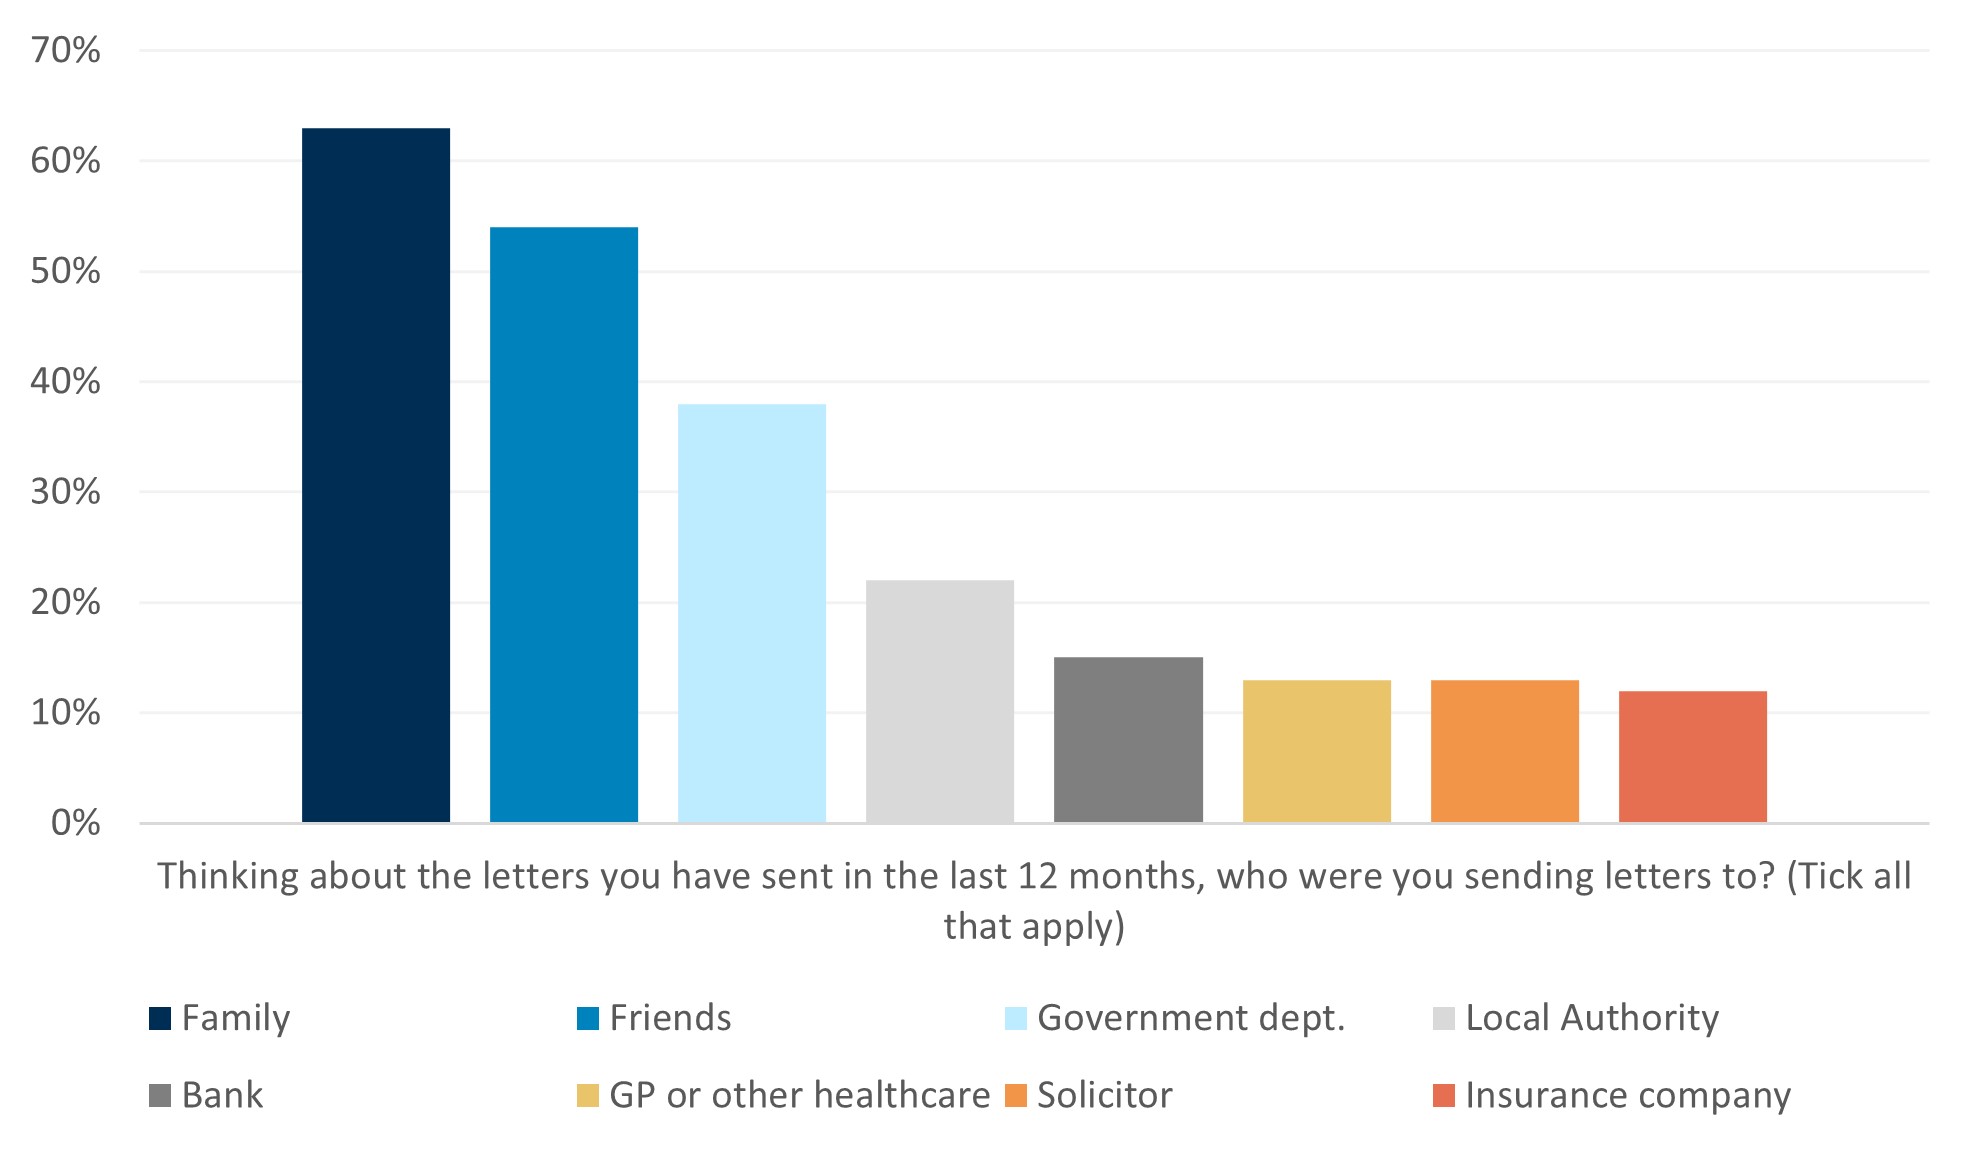 In answer to our survey question "Thinking about the letters you have sent in the last 12 months, who were you sending letters to? 63% of respondents sent letters to family, 54% to friends, 38% to government departments, 22% to local authorities or councils, 15% to banks, 13% to solicitors, 13% to GPs or other healthcare professionals, 12% to insurance companies and 9% to public bodies.